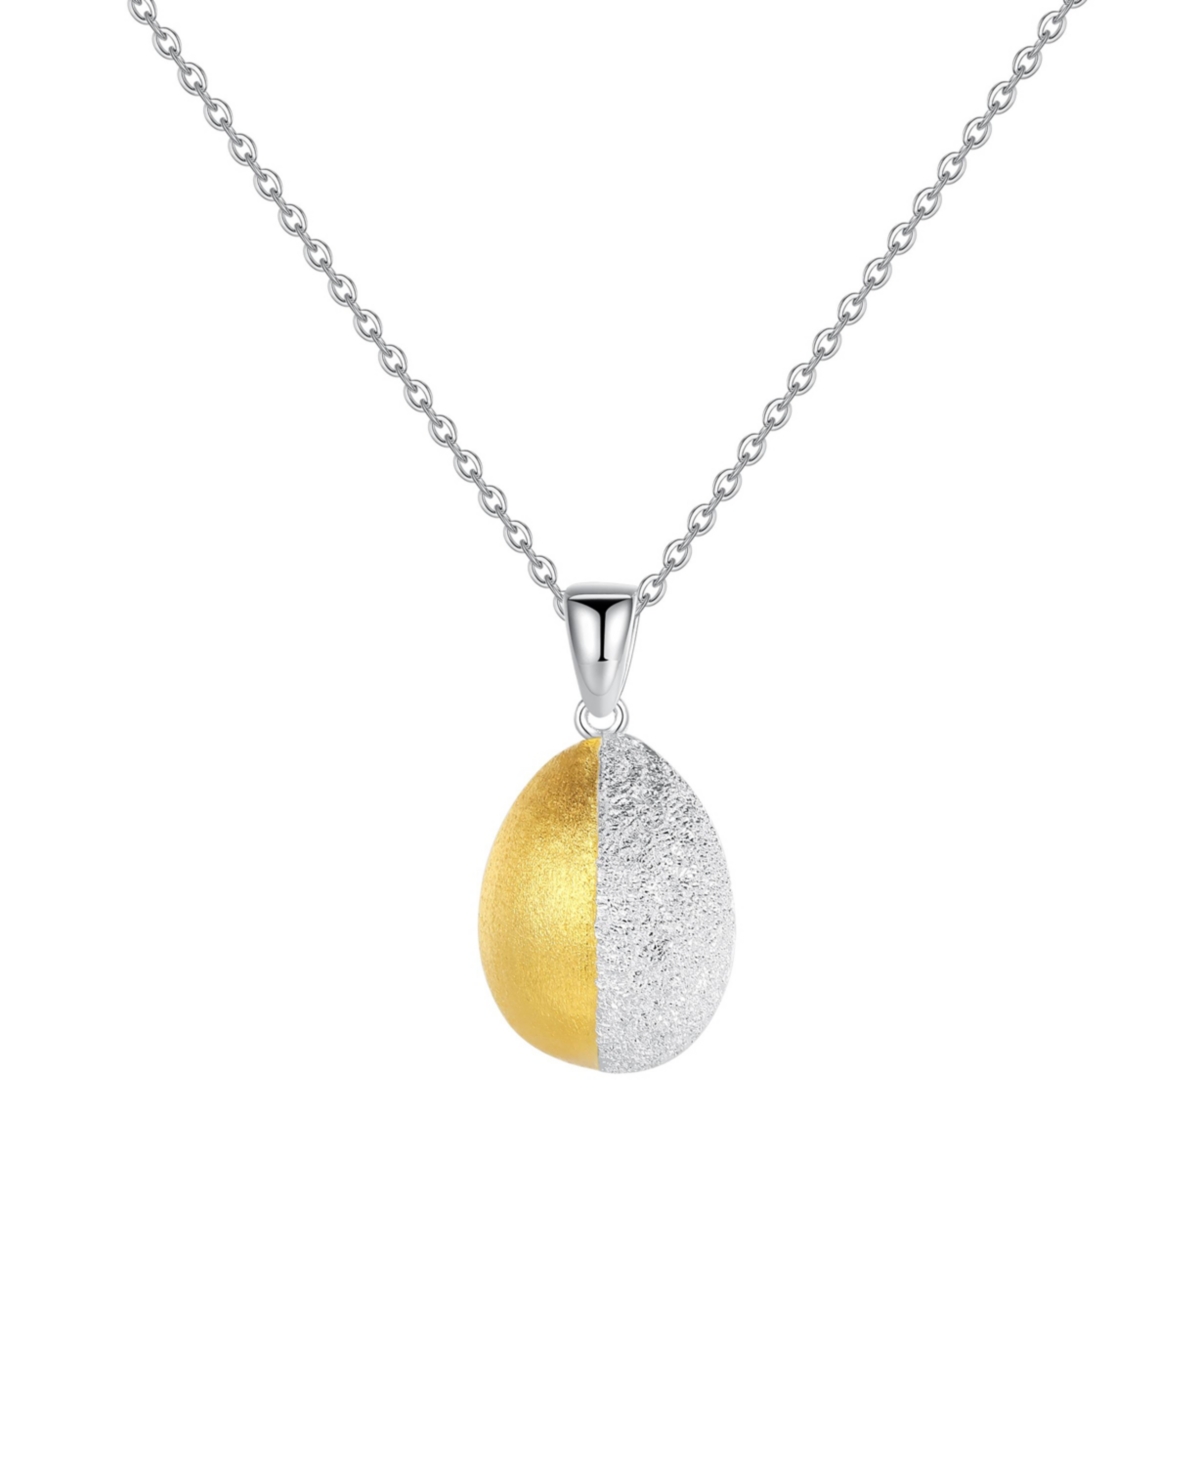 Frosted and Matted Texture Two Tone Pendant Necklace - Gold